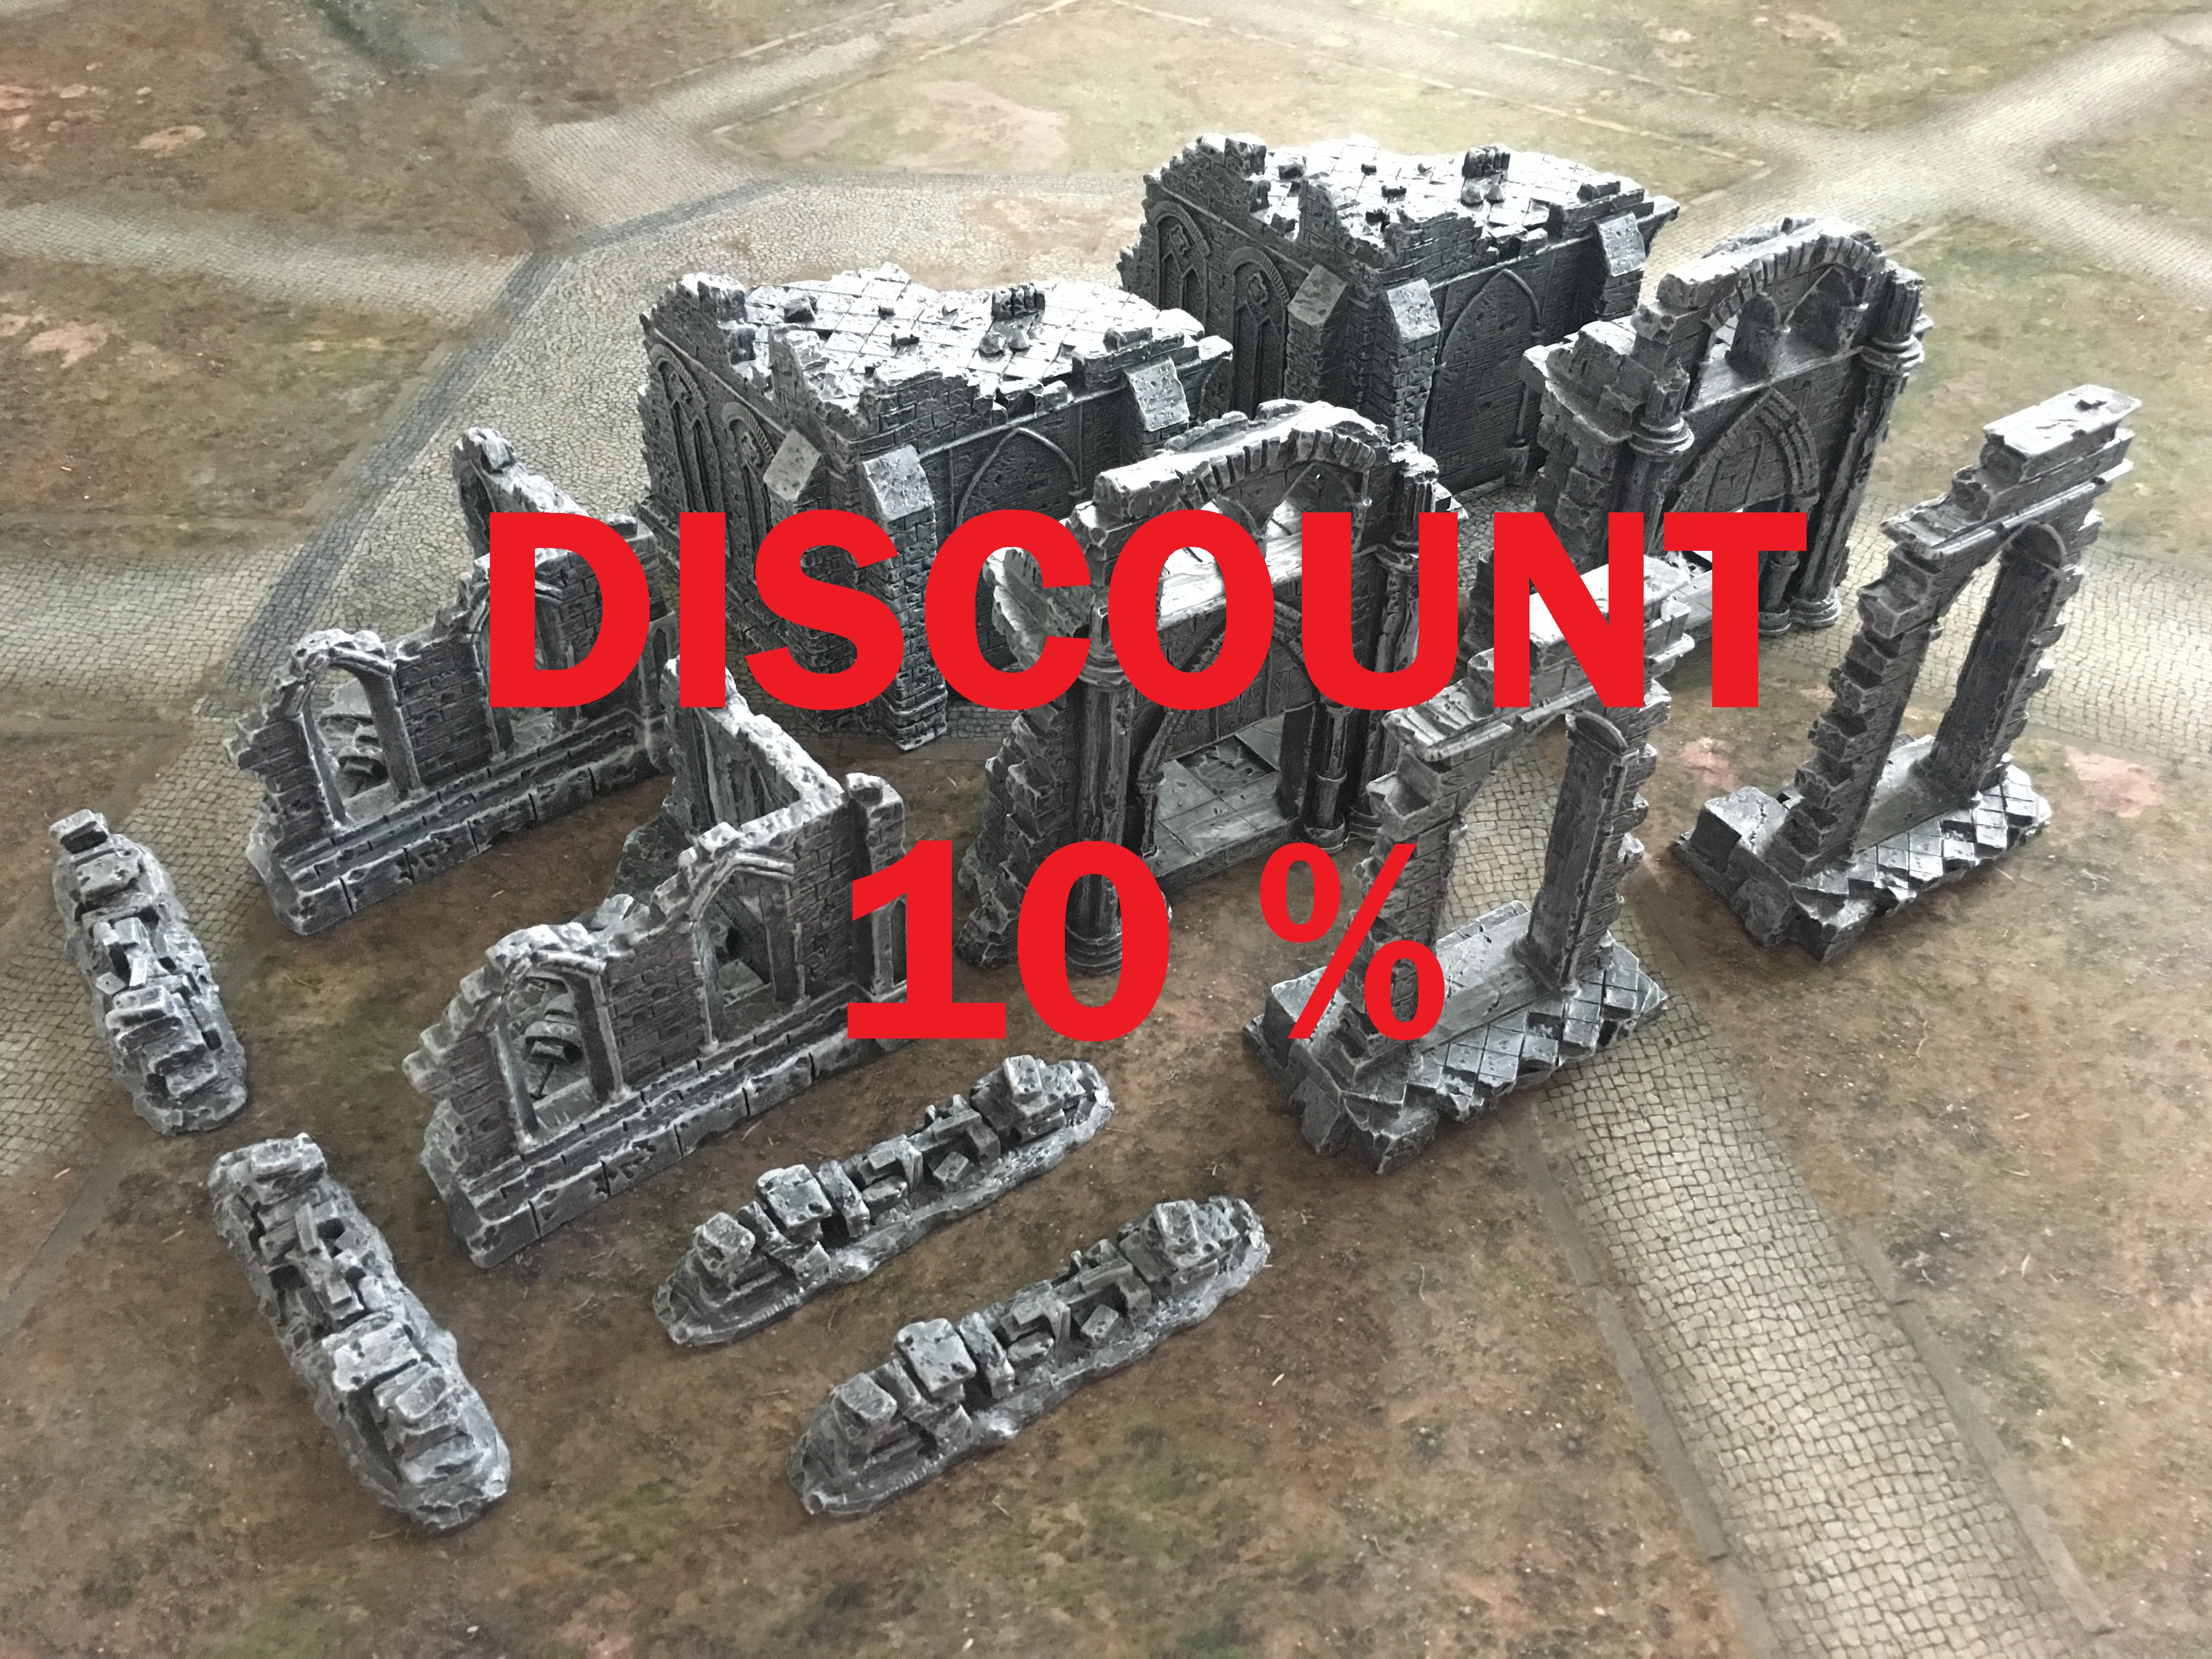 10 % DISCOUNT on Gates of the Realms prepainted terrain set